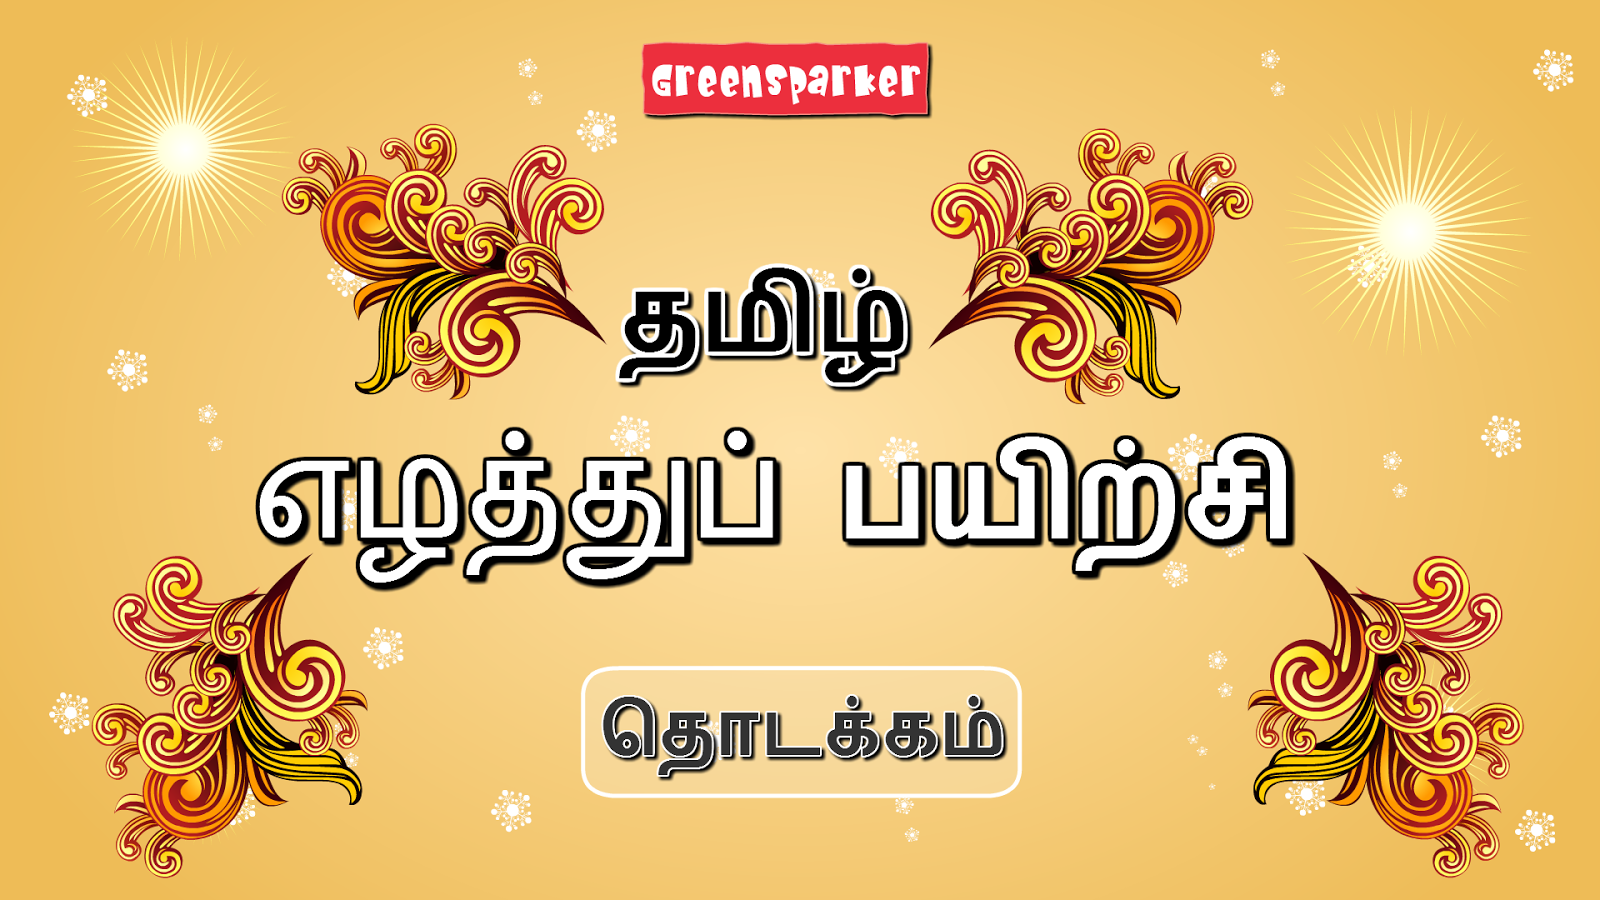 Tamil Alphabet Tracing - Android Apps on Google Play printable worksheets, learning, multiplication, education, and worksheets for teachers Tamil Handwriting Worksheets 900 x 1600